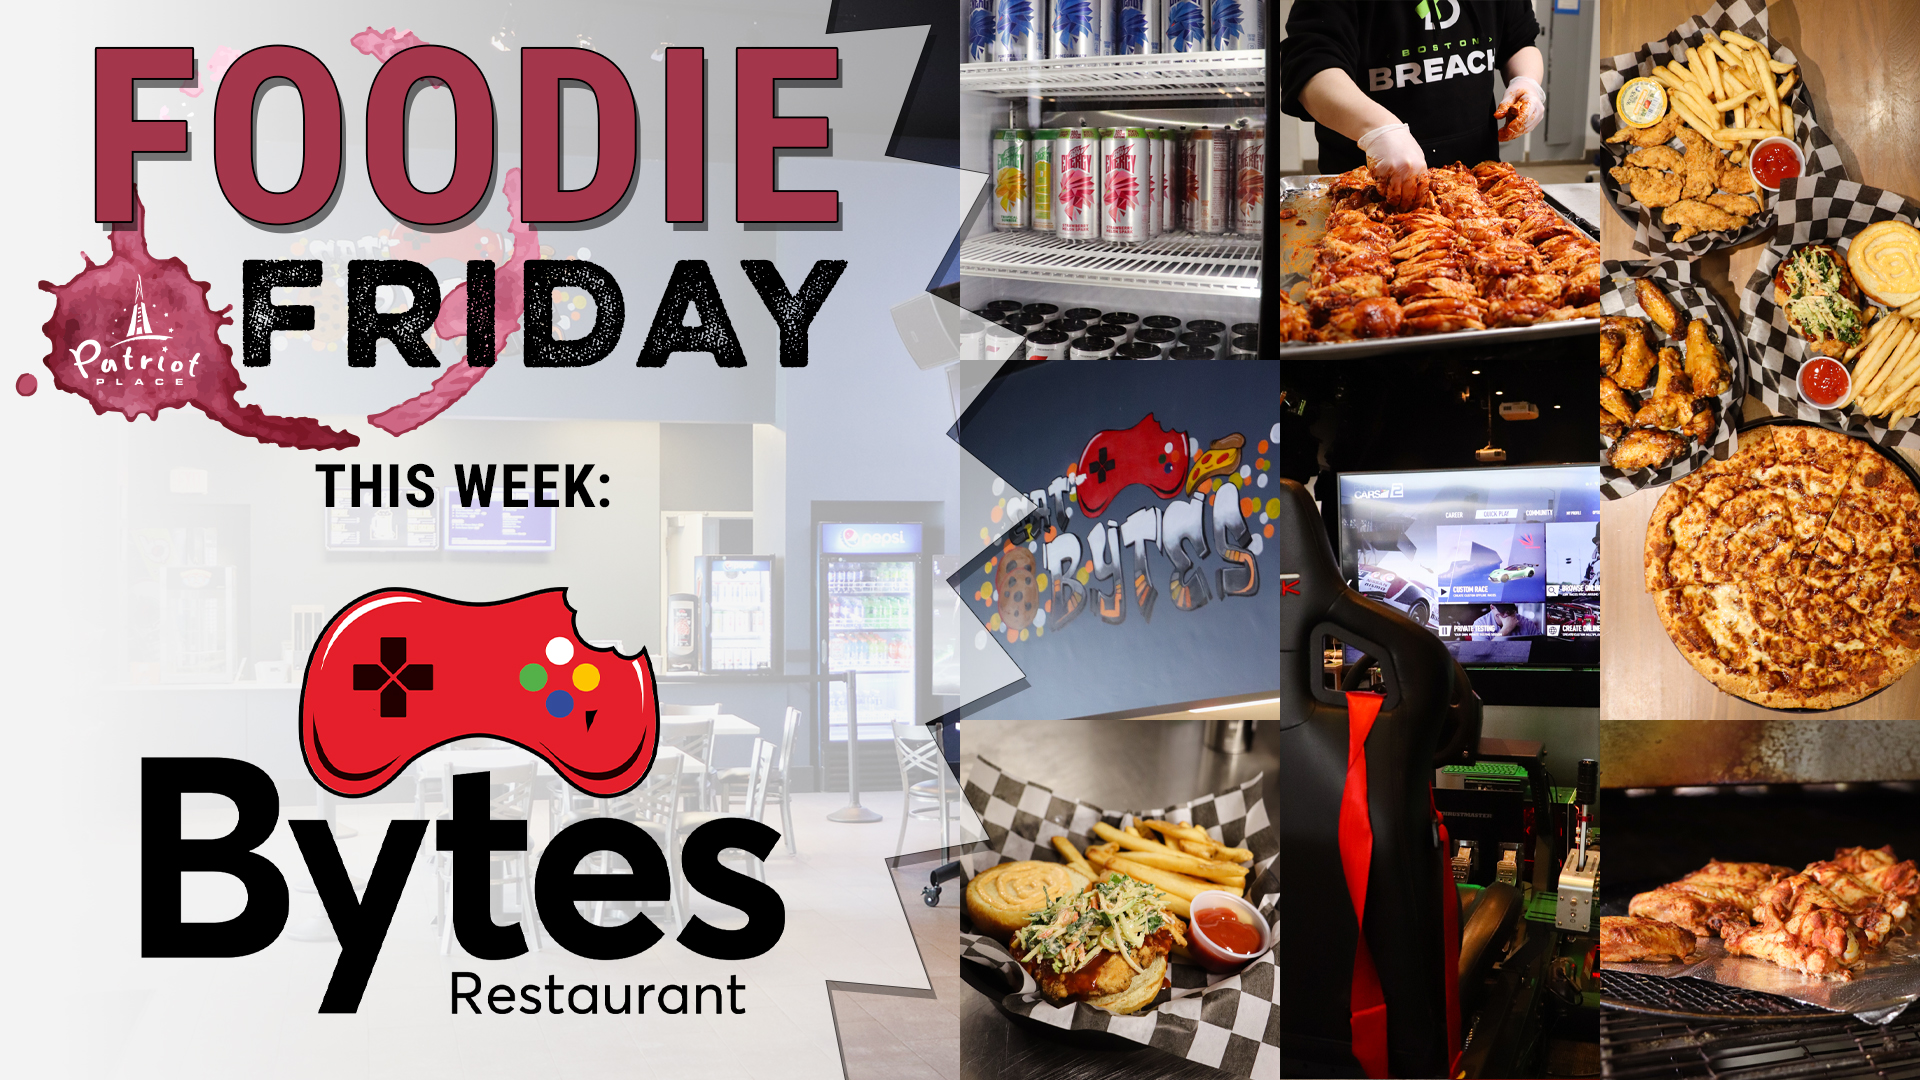 Patriot Place Foodie Friday Bytes